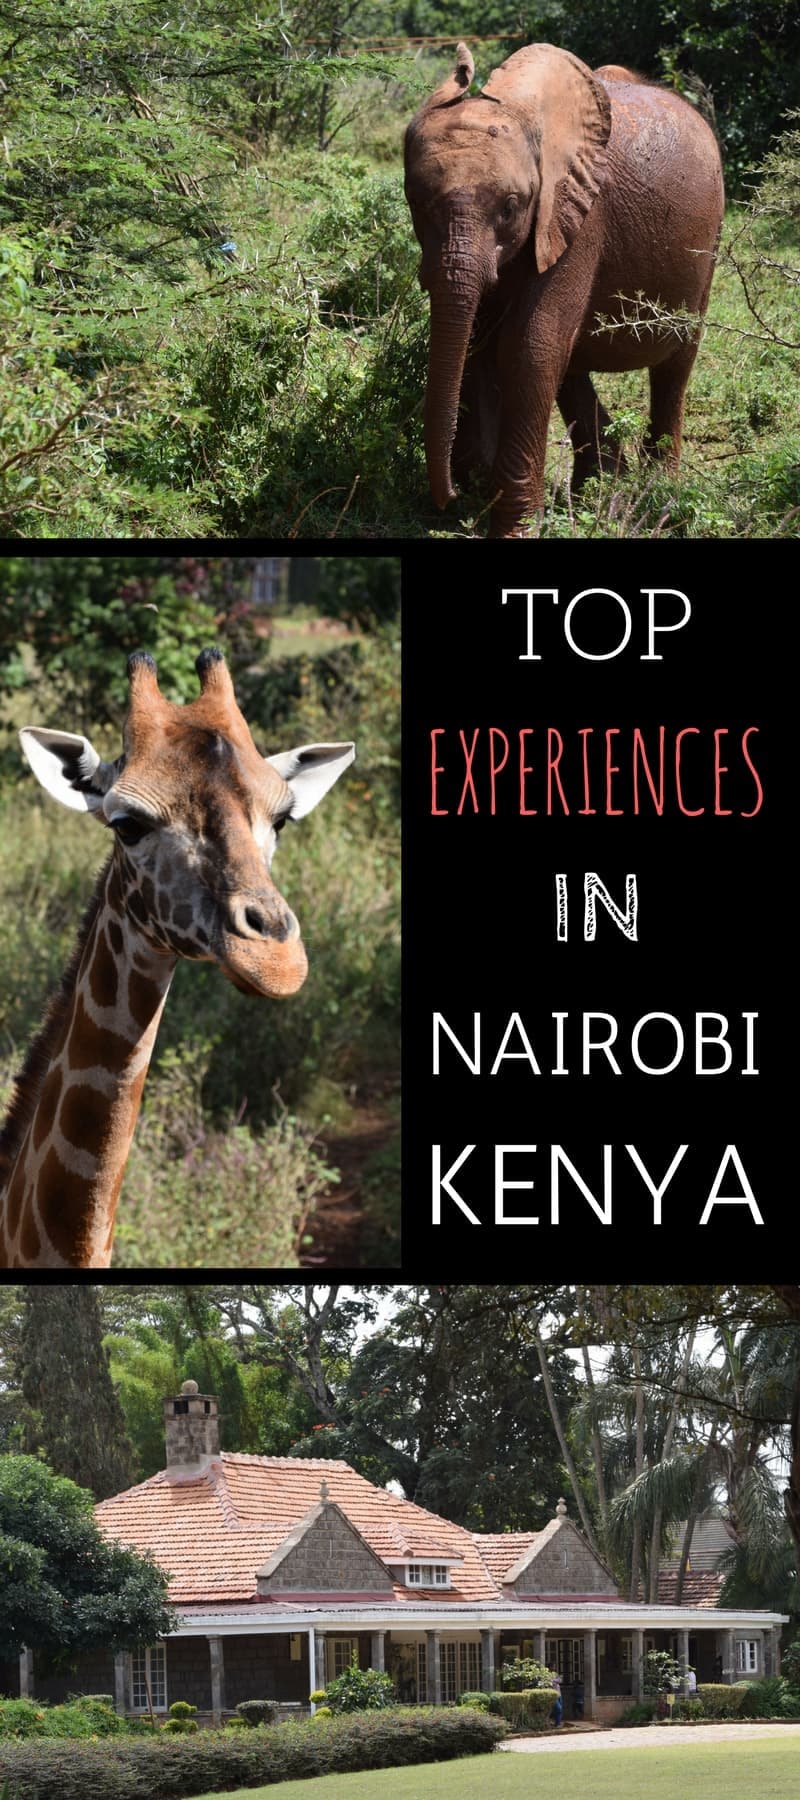 A guide to the top experiences in Nairobi Kenya. This post details all the main attractions and also provides a full 1 day itinerary from our trip to Nairobi.